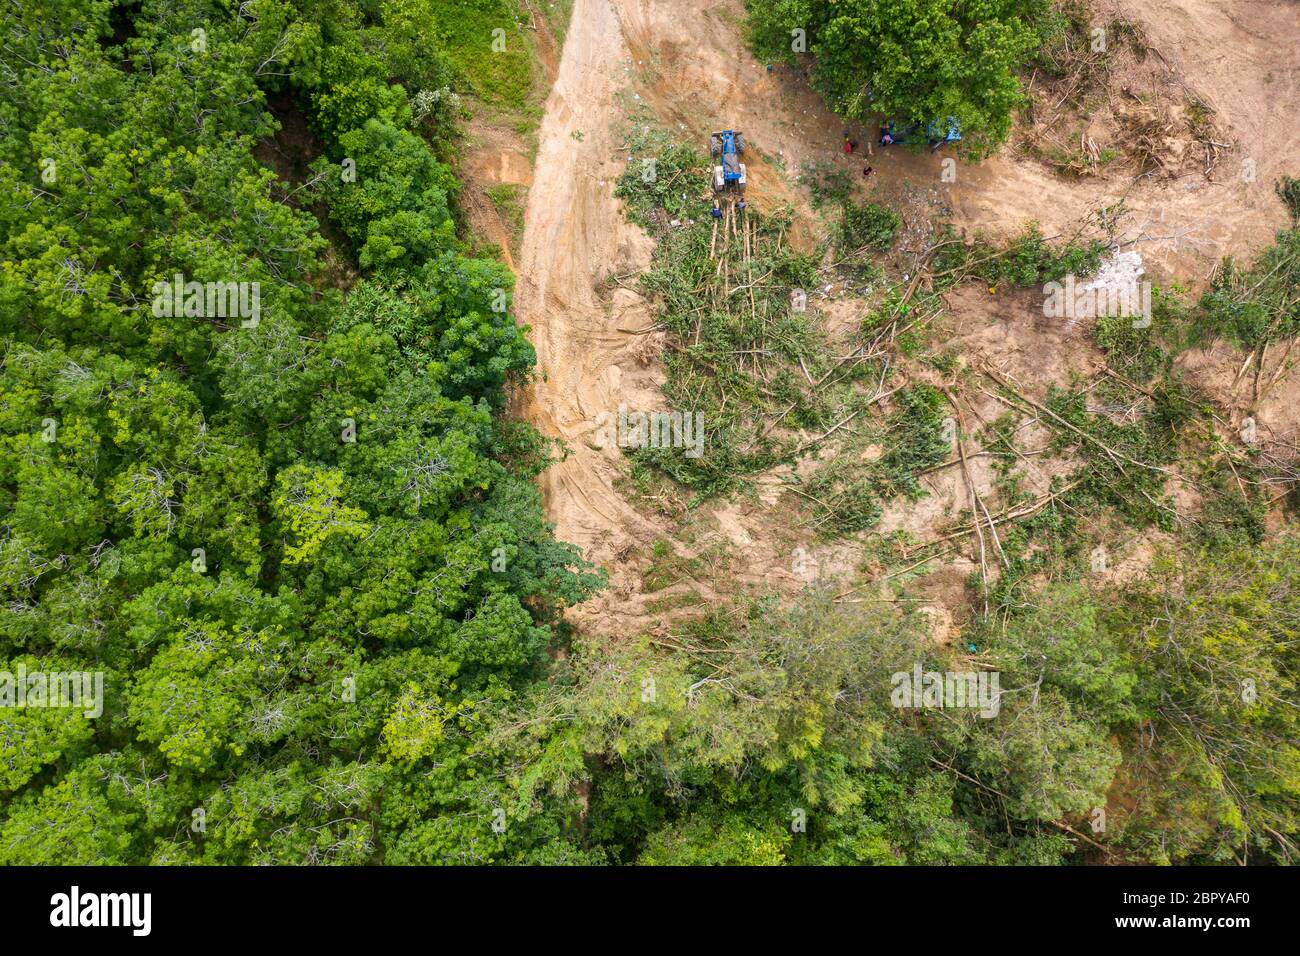 Aerial view of deforestation of a tropical rainforest to make way for logging and palm oil plantations contributing to climate change and global warmi Stock Photo